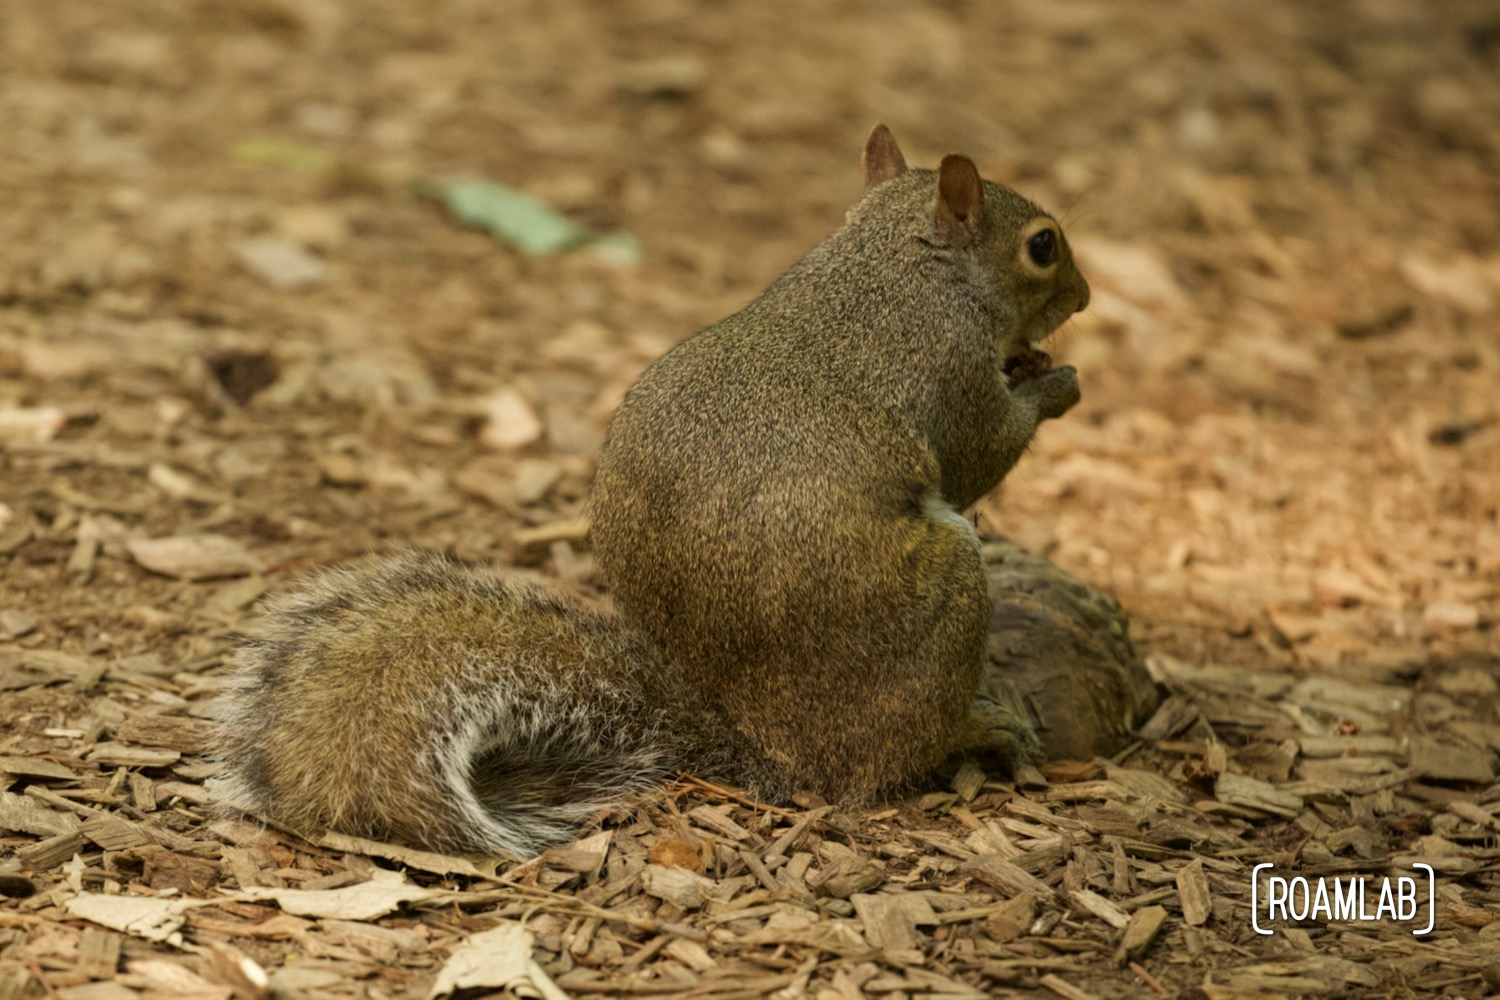 Eastern grey squirrel foraging along the walking path of Woodlands Nature Station.